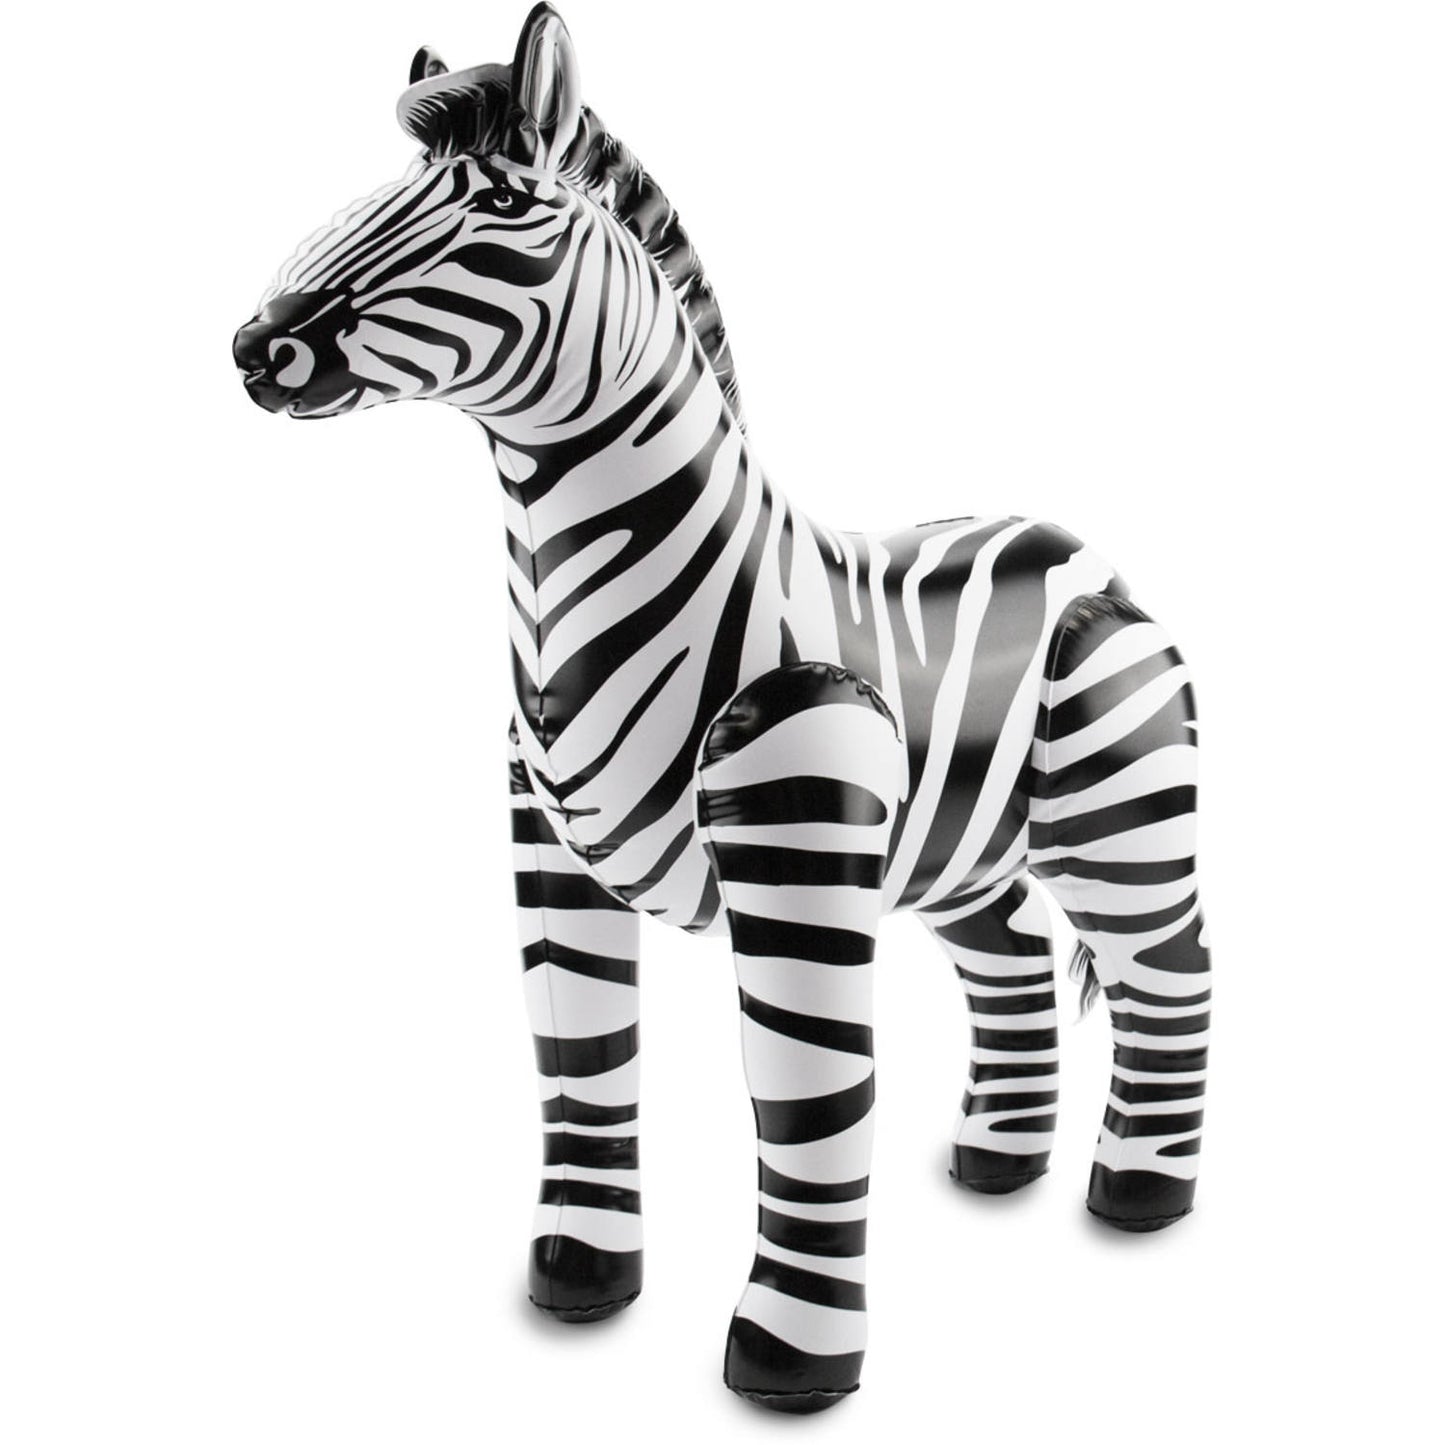 Inflatable Zebra - The Eye-catcher for Every Party